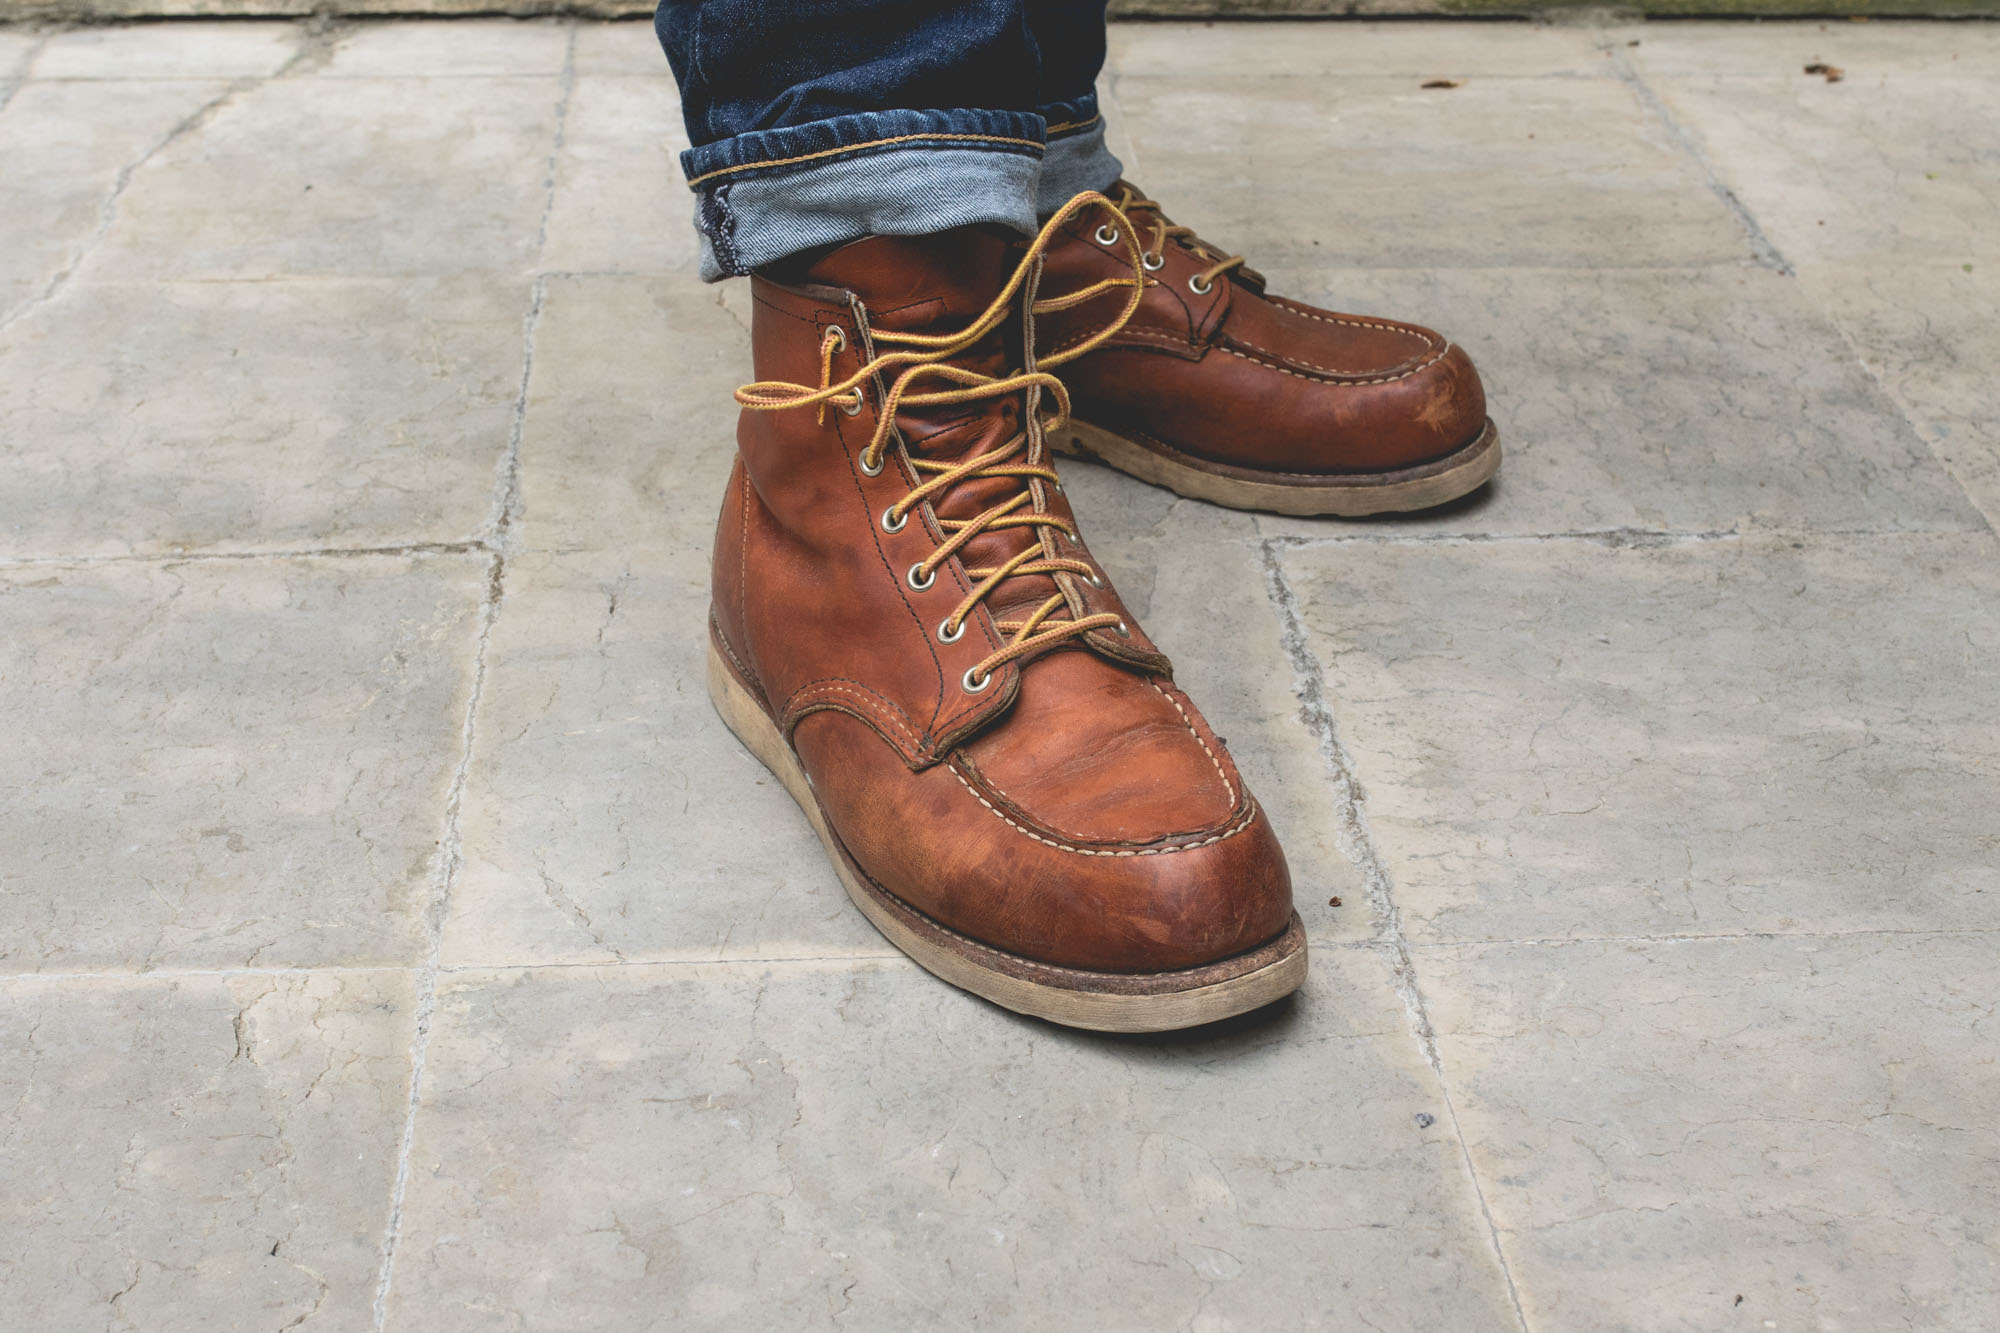 Red Wing Shoes Femme | escapeauthority.com